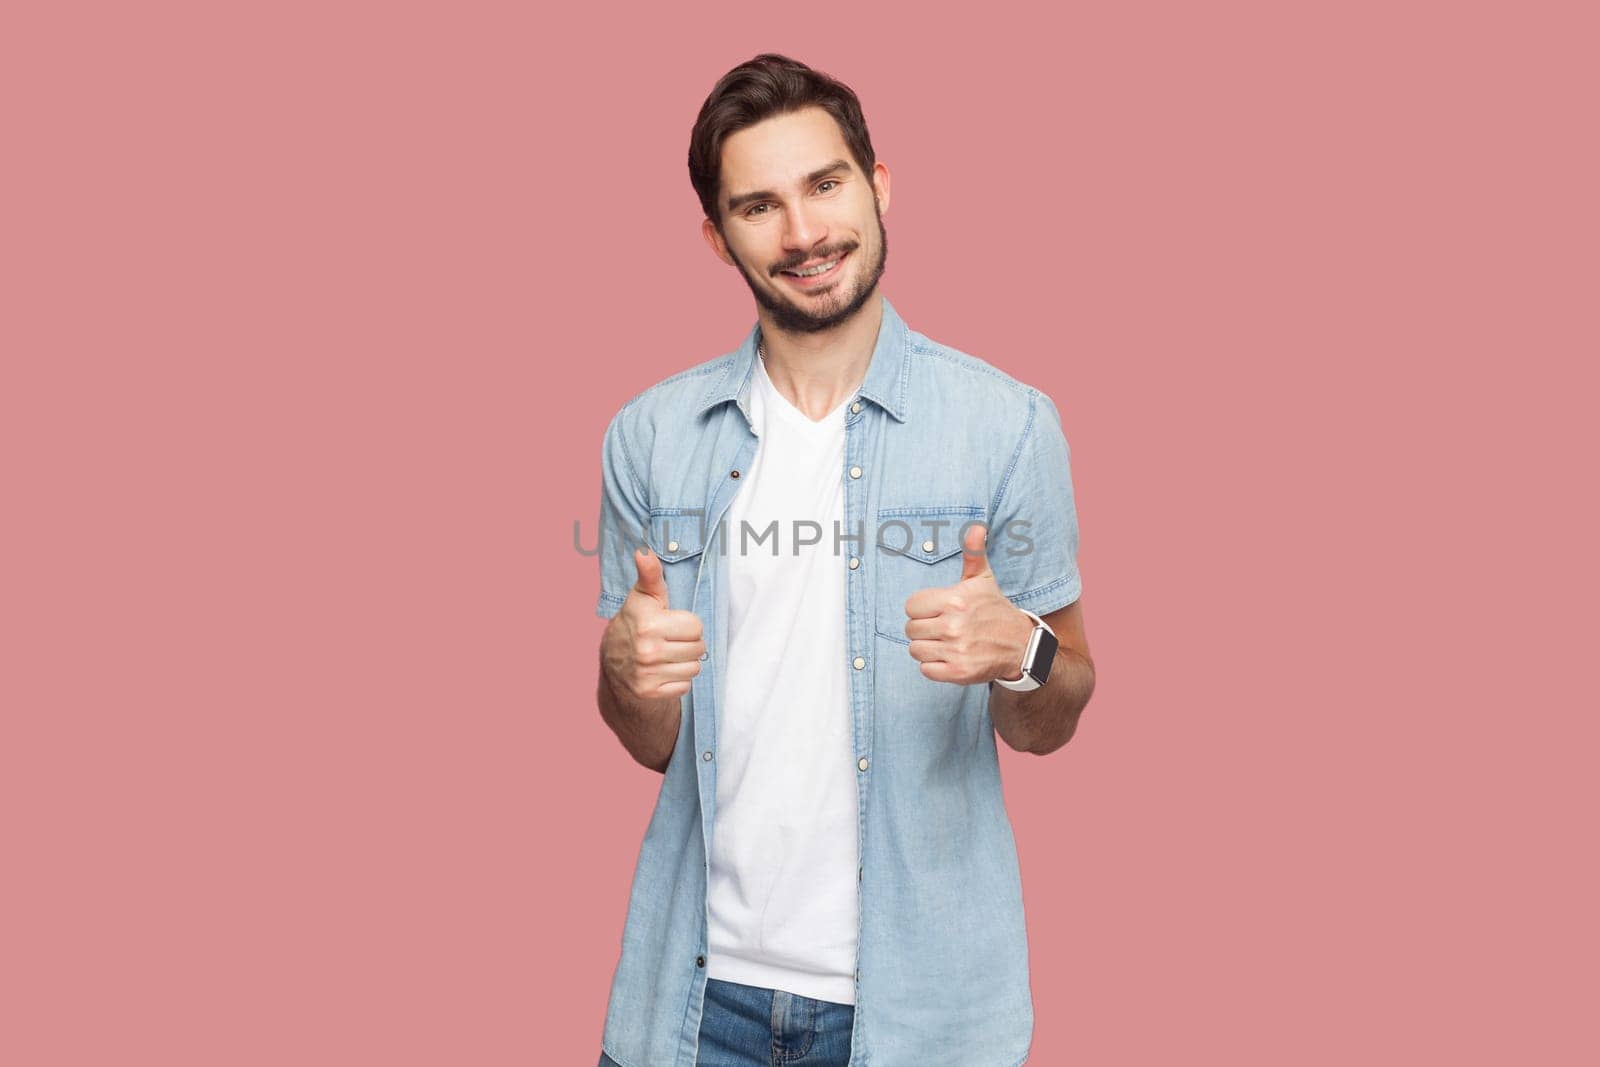 Man in blue shirt gesturing thumbs-up, telling you that you are doing a good job, looking and smiling at the camera with cheerful expression. Indoor studio shot isolated on pink background.